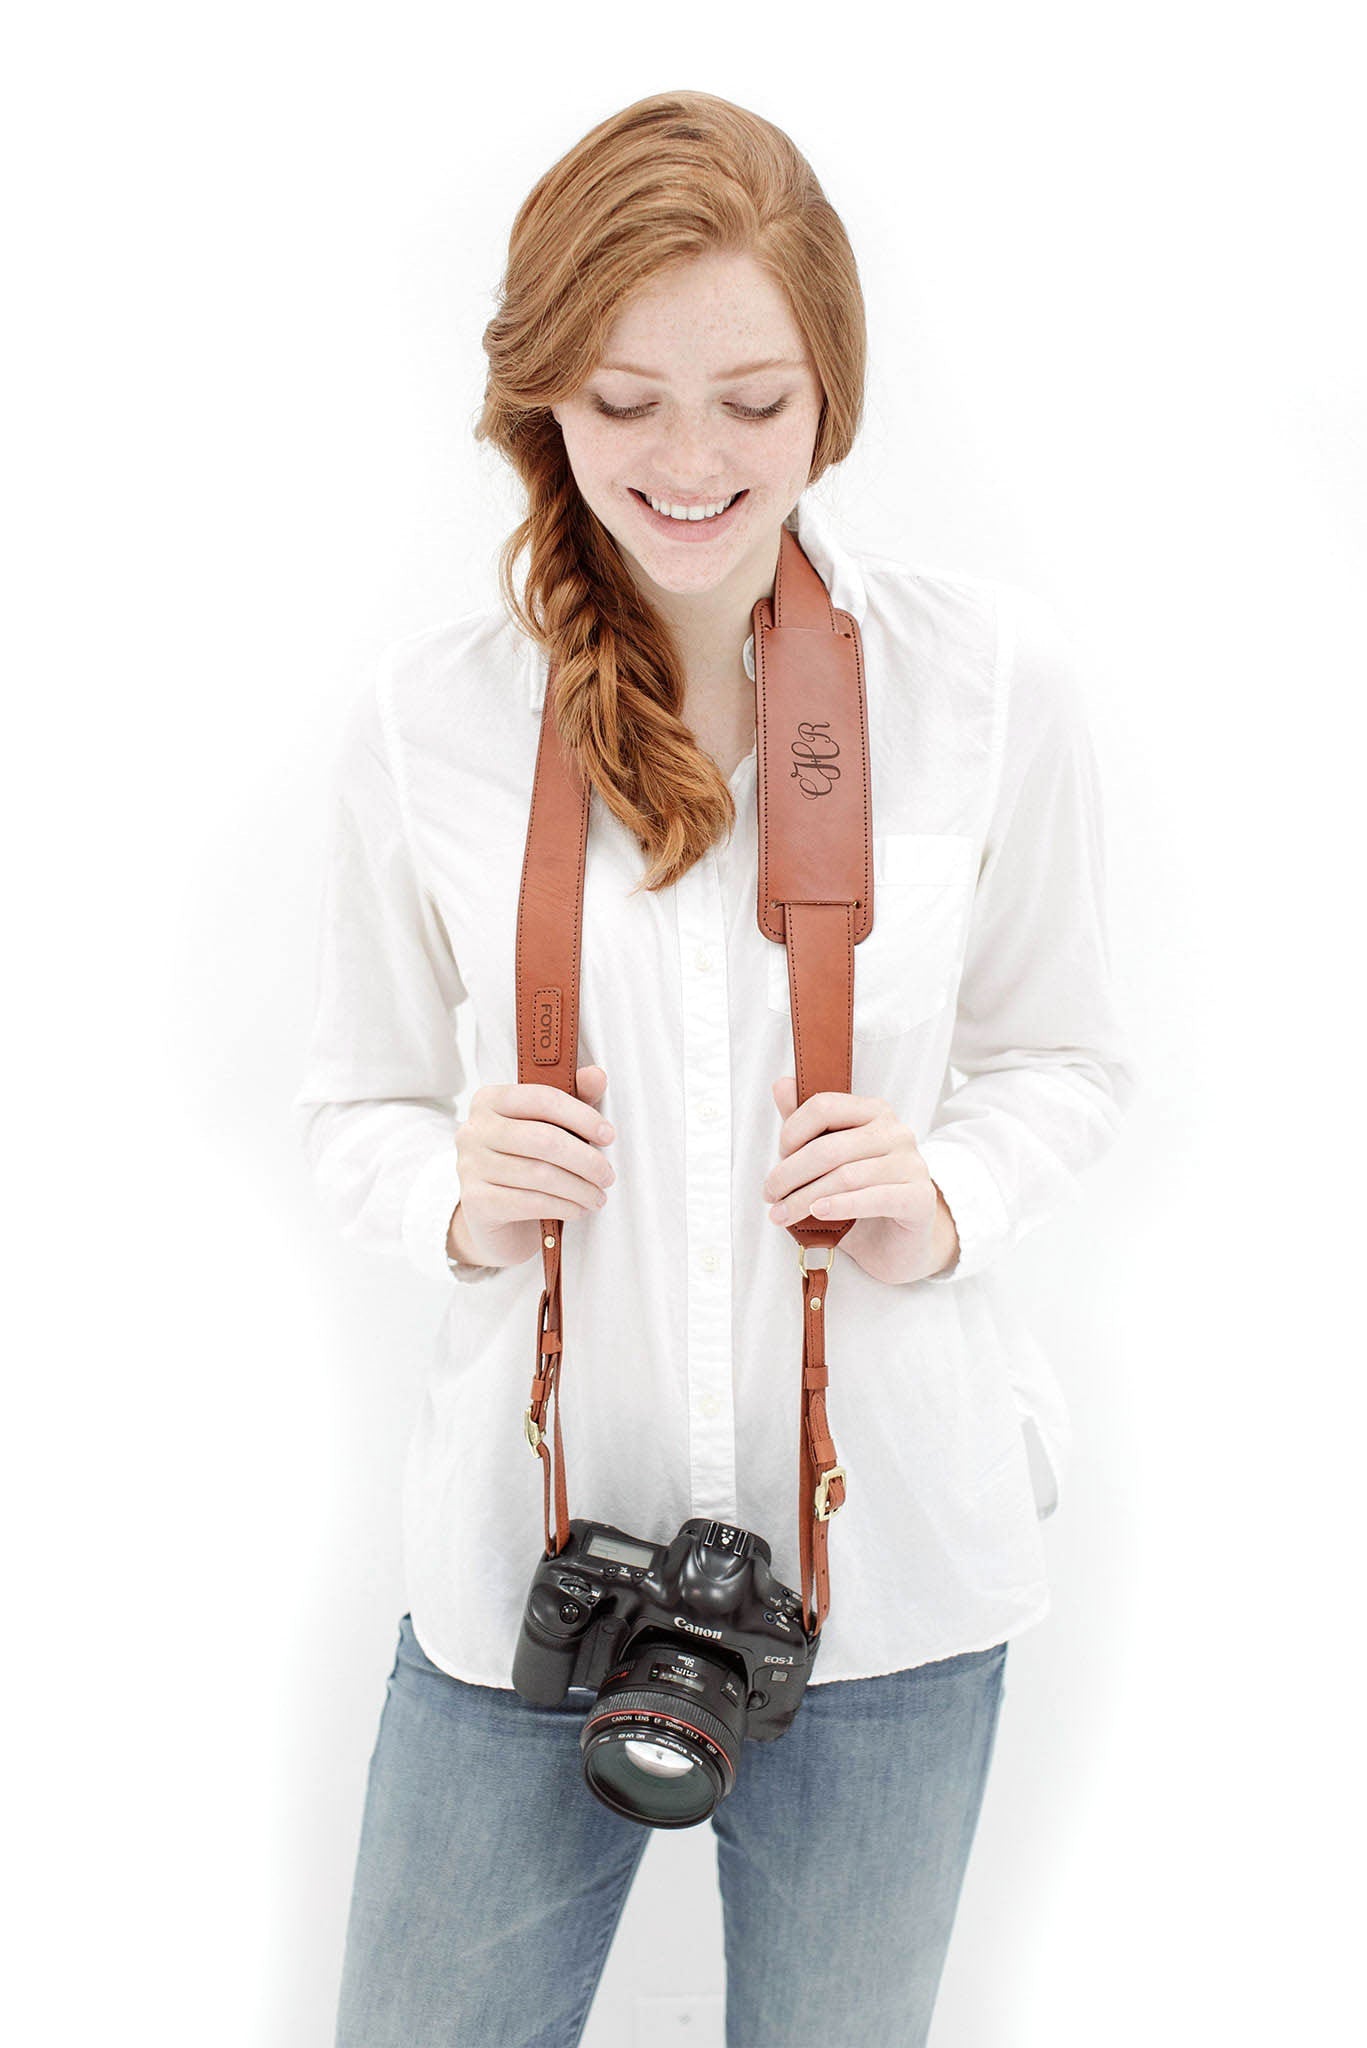 FOTO | James Fotostrap - a cognac brown genuine all-leather camera strap that can be personalized with a monogram or business logo, making this leather camera strap the perfect personalized gift.